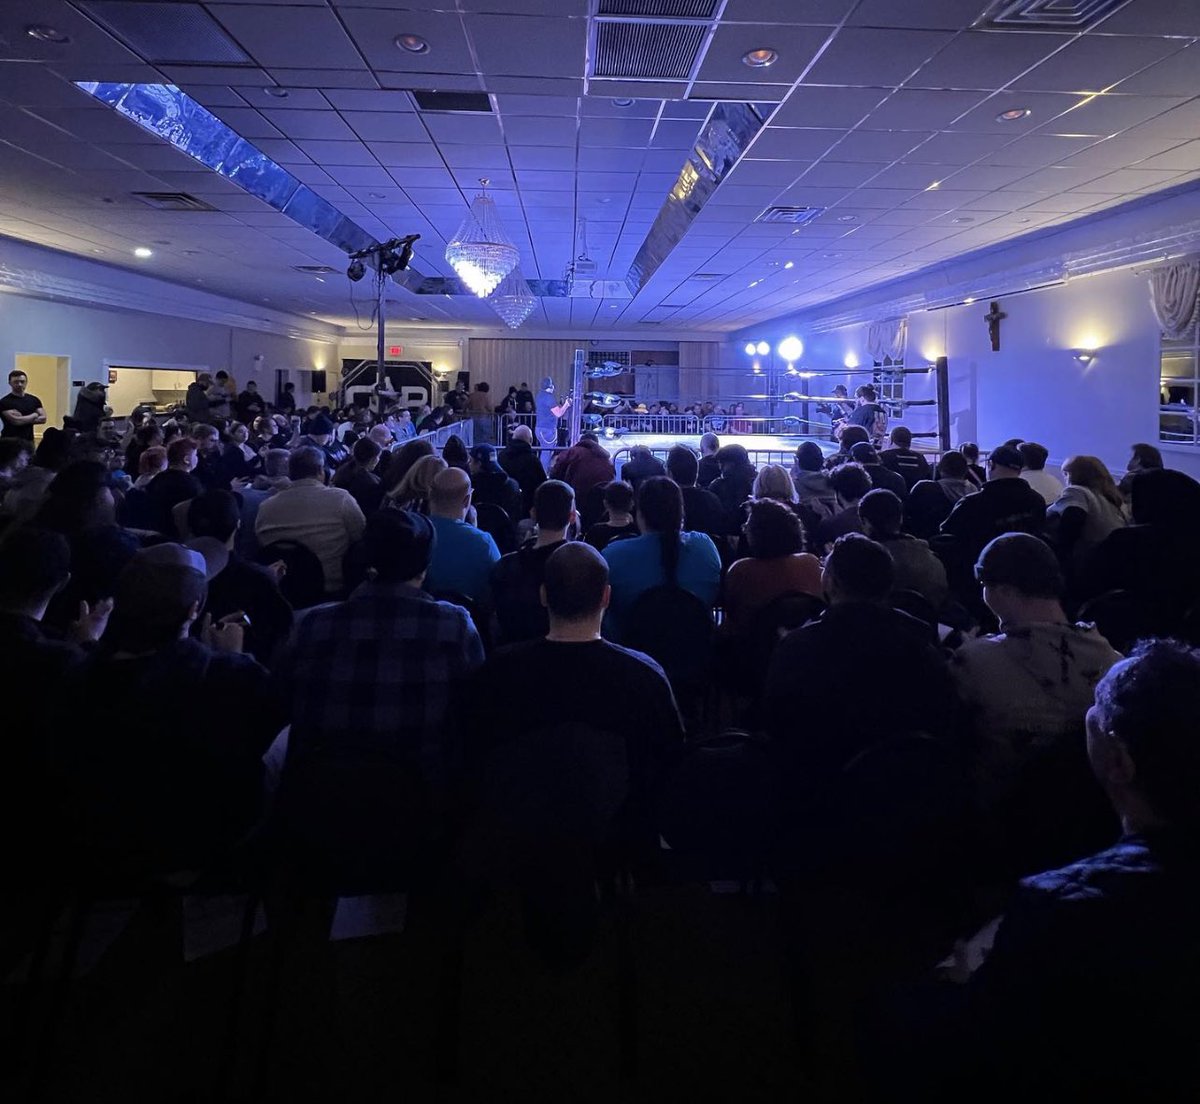 Thank you to everyone who came out last night for Create A Pro presents #OhBaby! The show will stream for FREE this Sunday night at 7pm on the @MajorWFPod twitch channel Create A Pro returns to Lynbrook March 19th, tickets go on sale next Monday at 7pm Don’t miss it